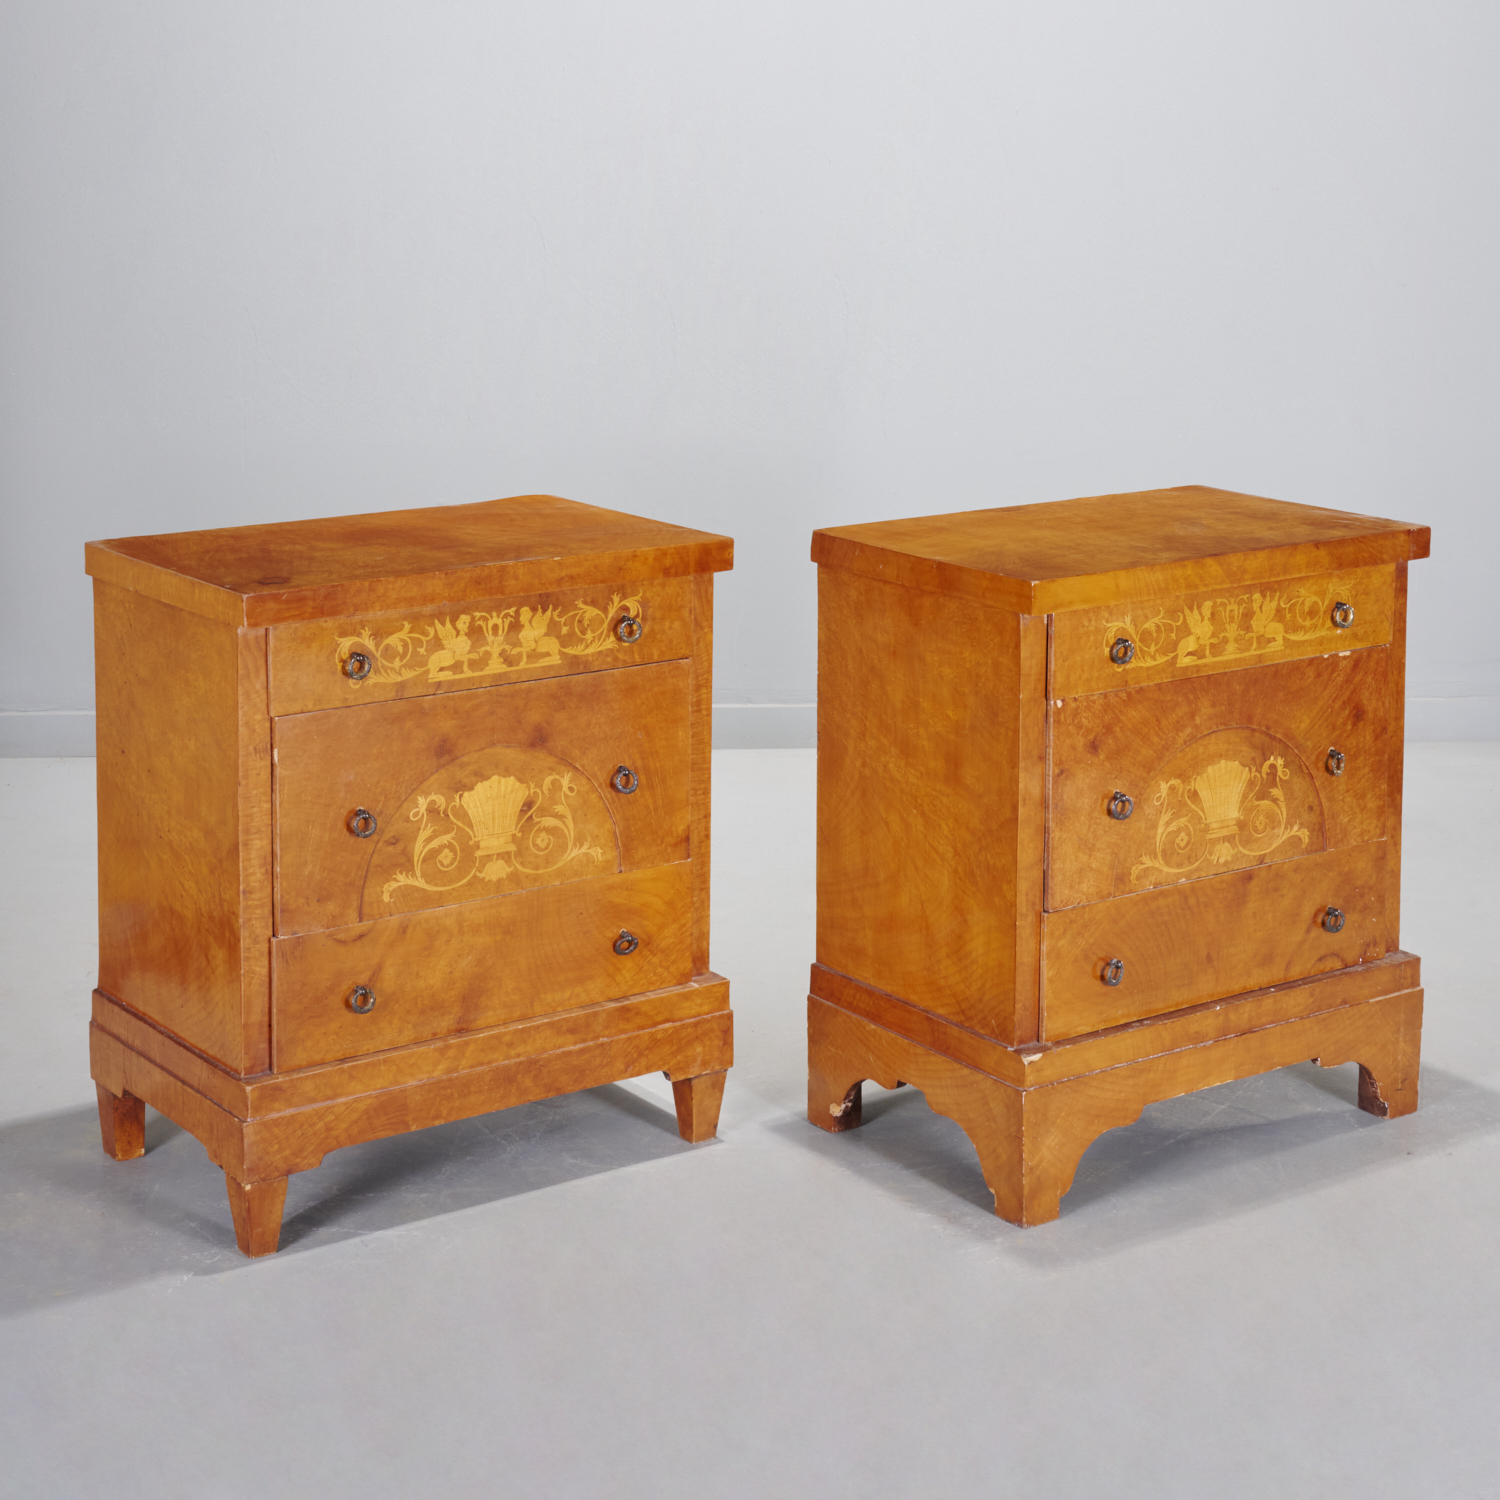 NEAR PAIR BALTIC NEOCLASSICAL COMMODES 360714